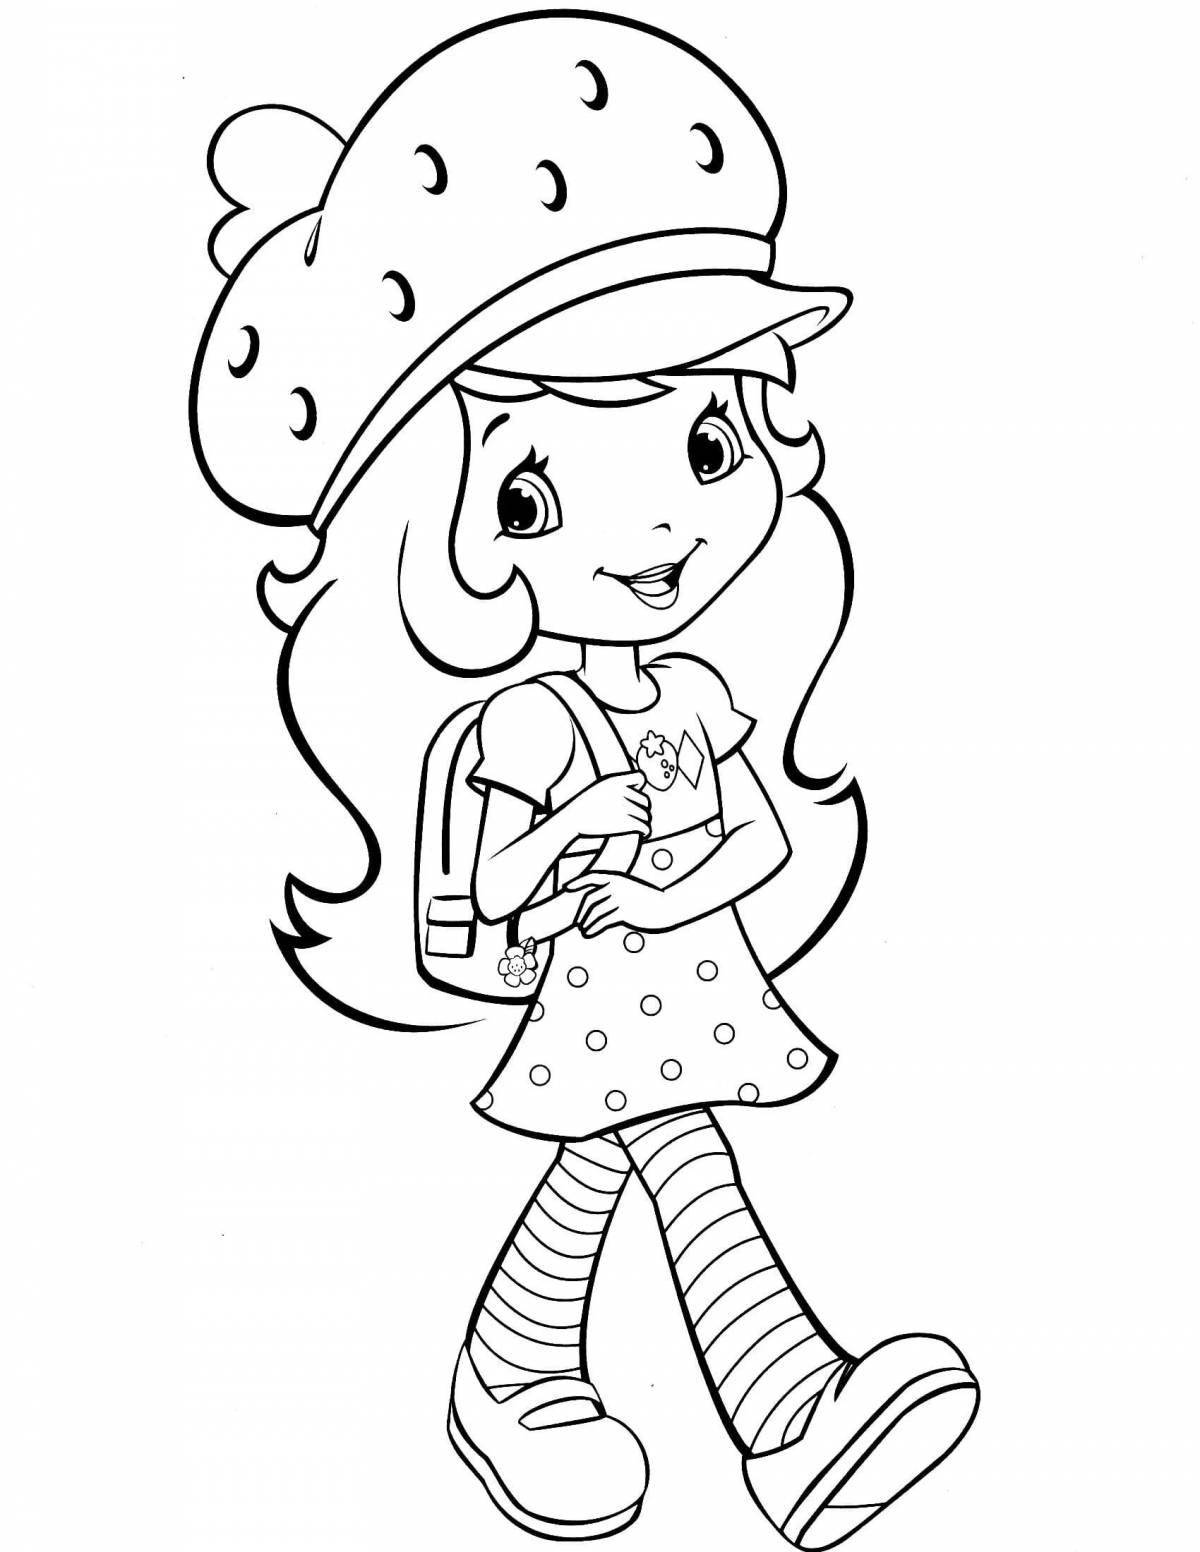 Exciting coloring pages for berry girls